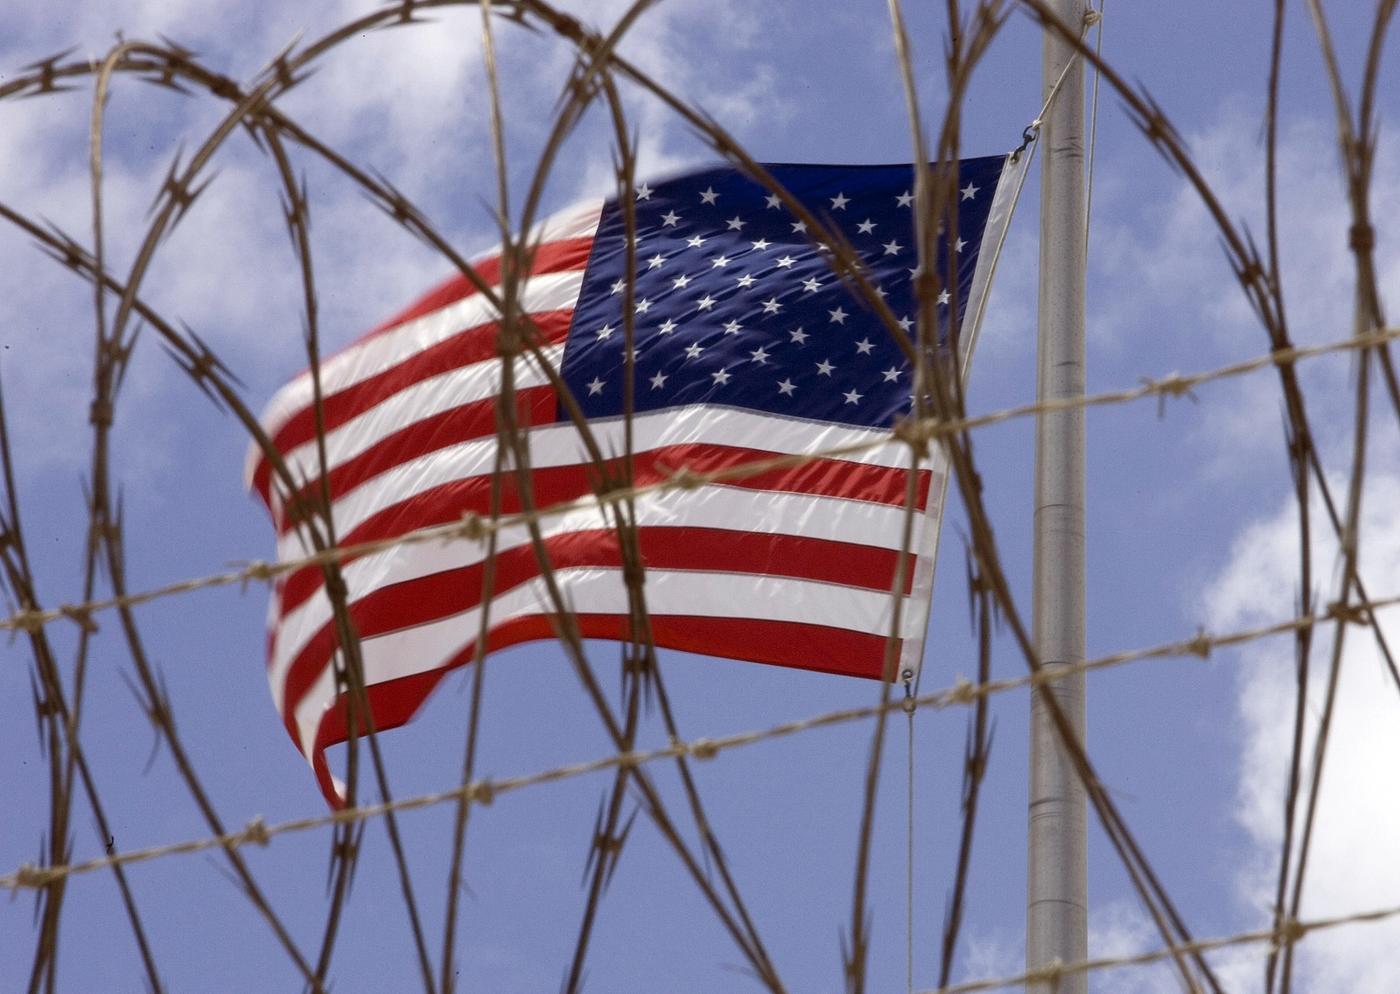 Officials in the Biden administration said the government aims to empty the detention centre.